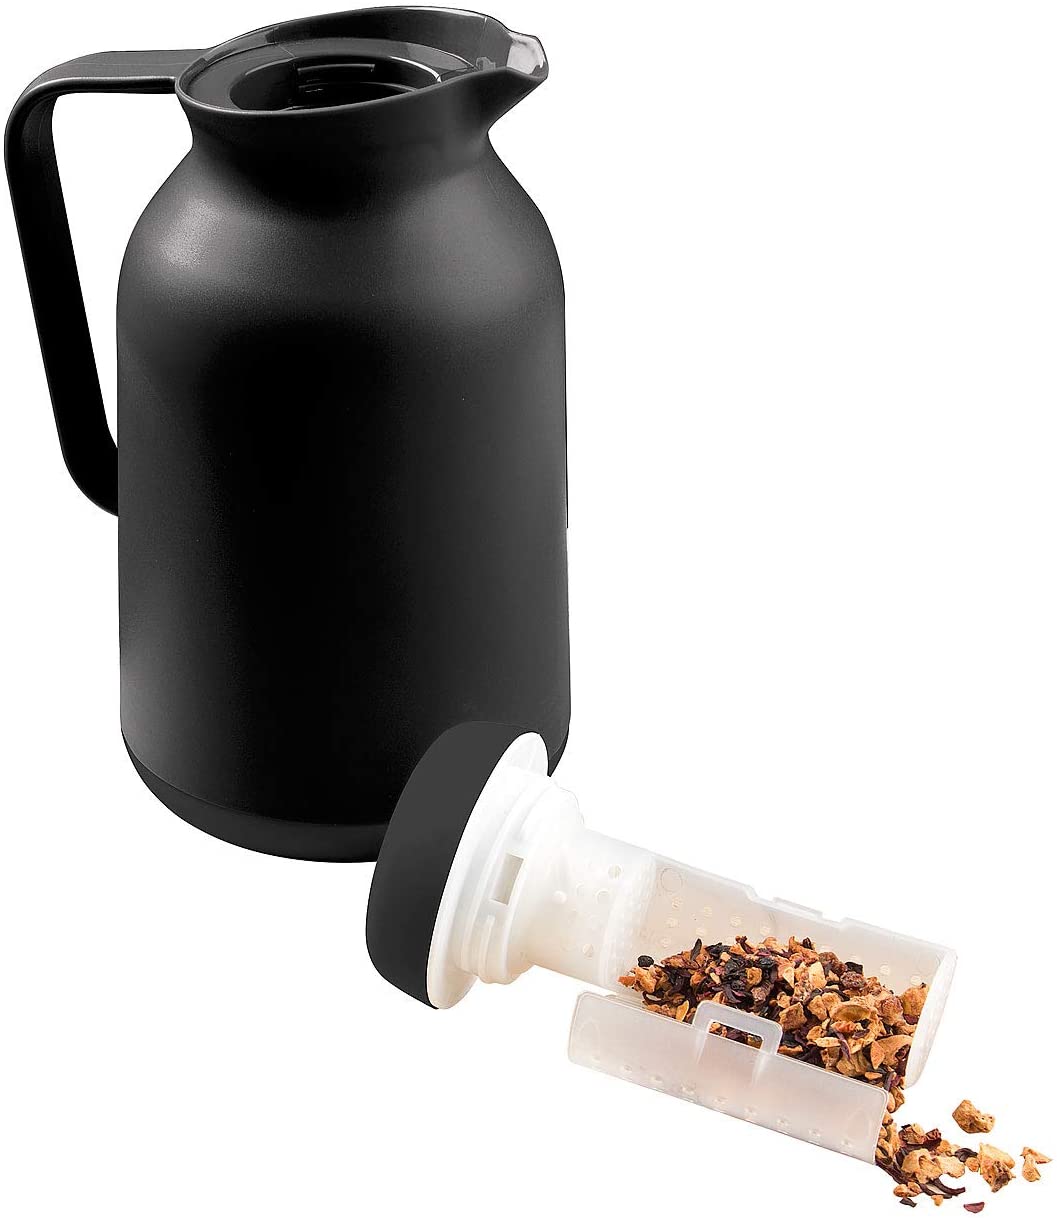 Rosenstein & Söhne Thermal Teapot with Strainer: 2-in-1 Vacuum Insulated Jug for Coffee and Tea, with Tea Strainer, 1 Litre (Tea Insulated Jug with Strainer)